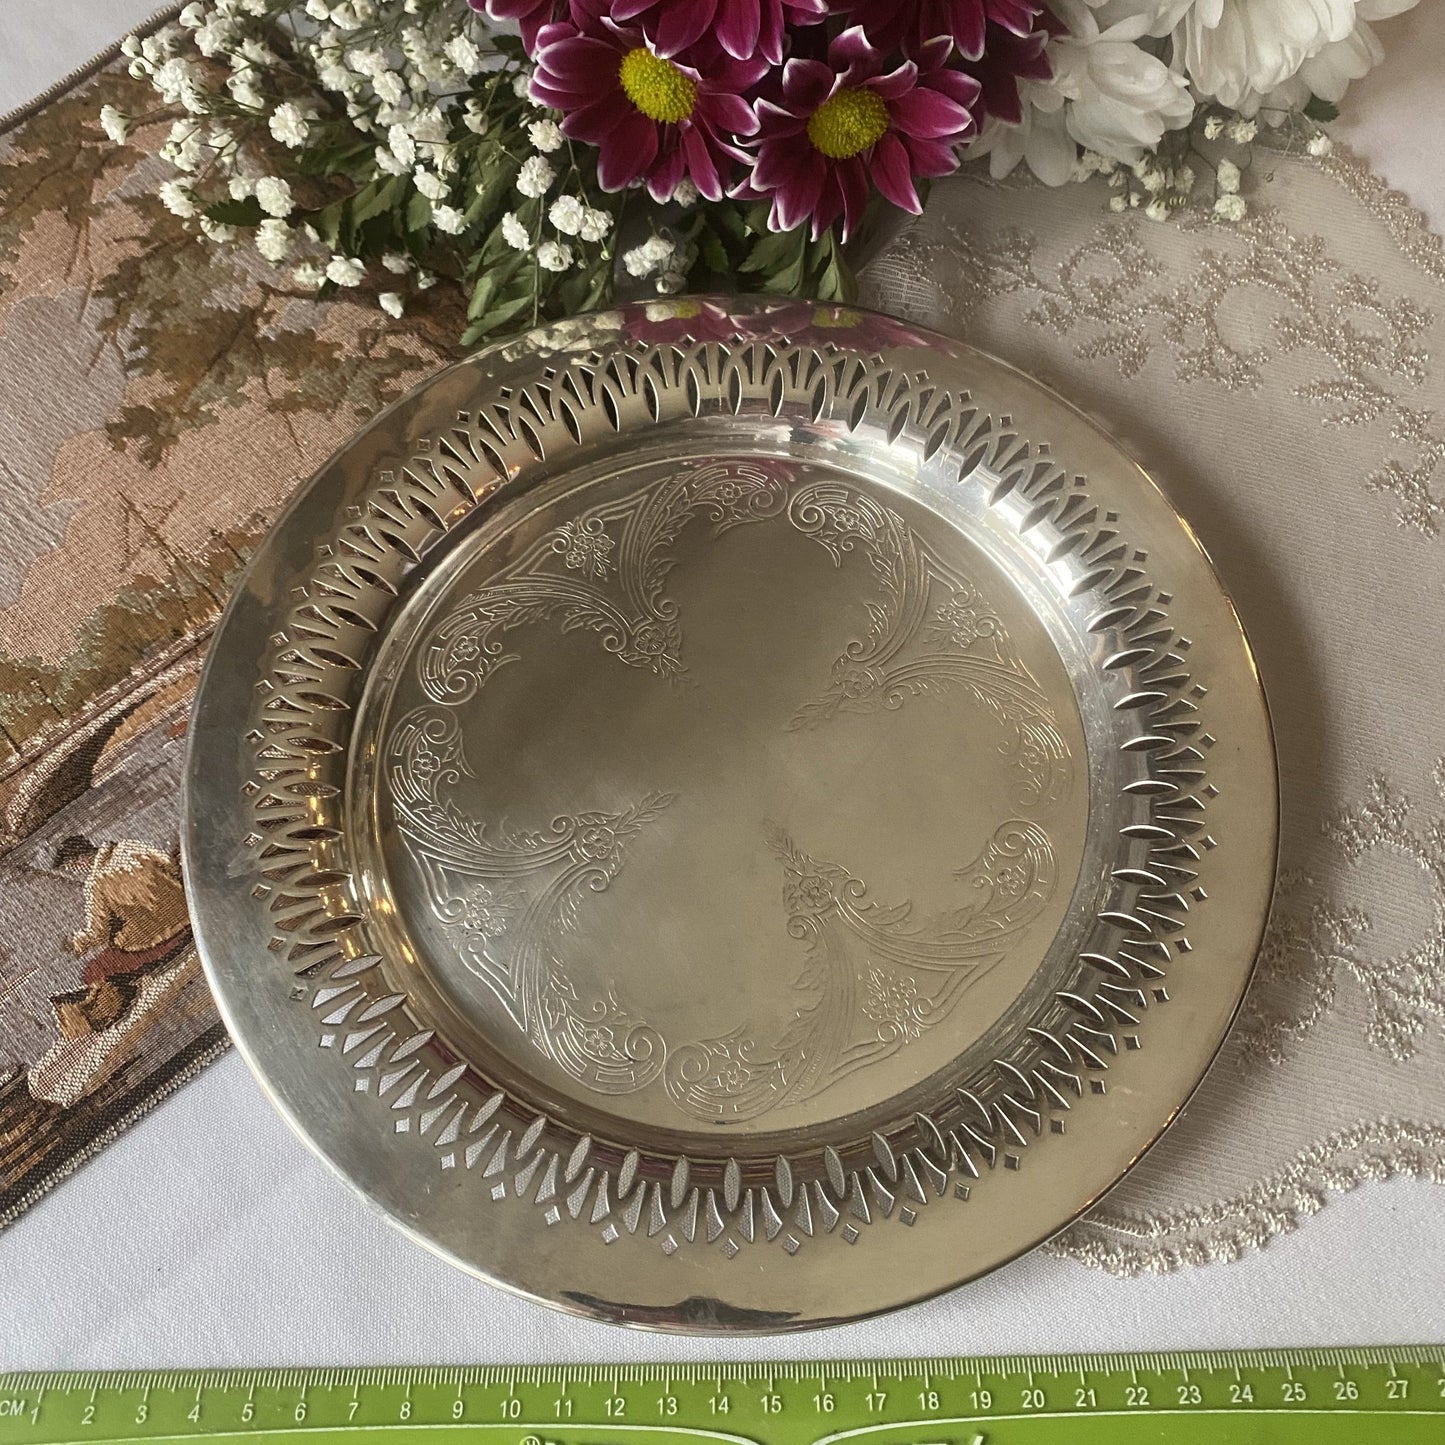 WM.A.Rogers Canada 065 Silver Plated Tray